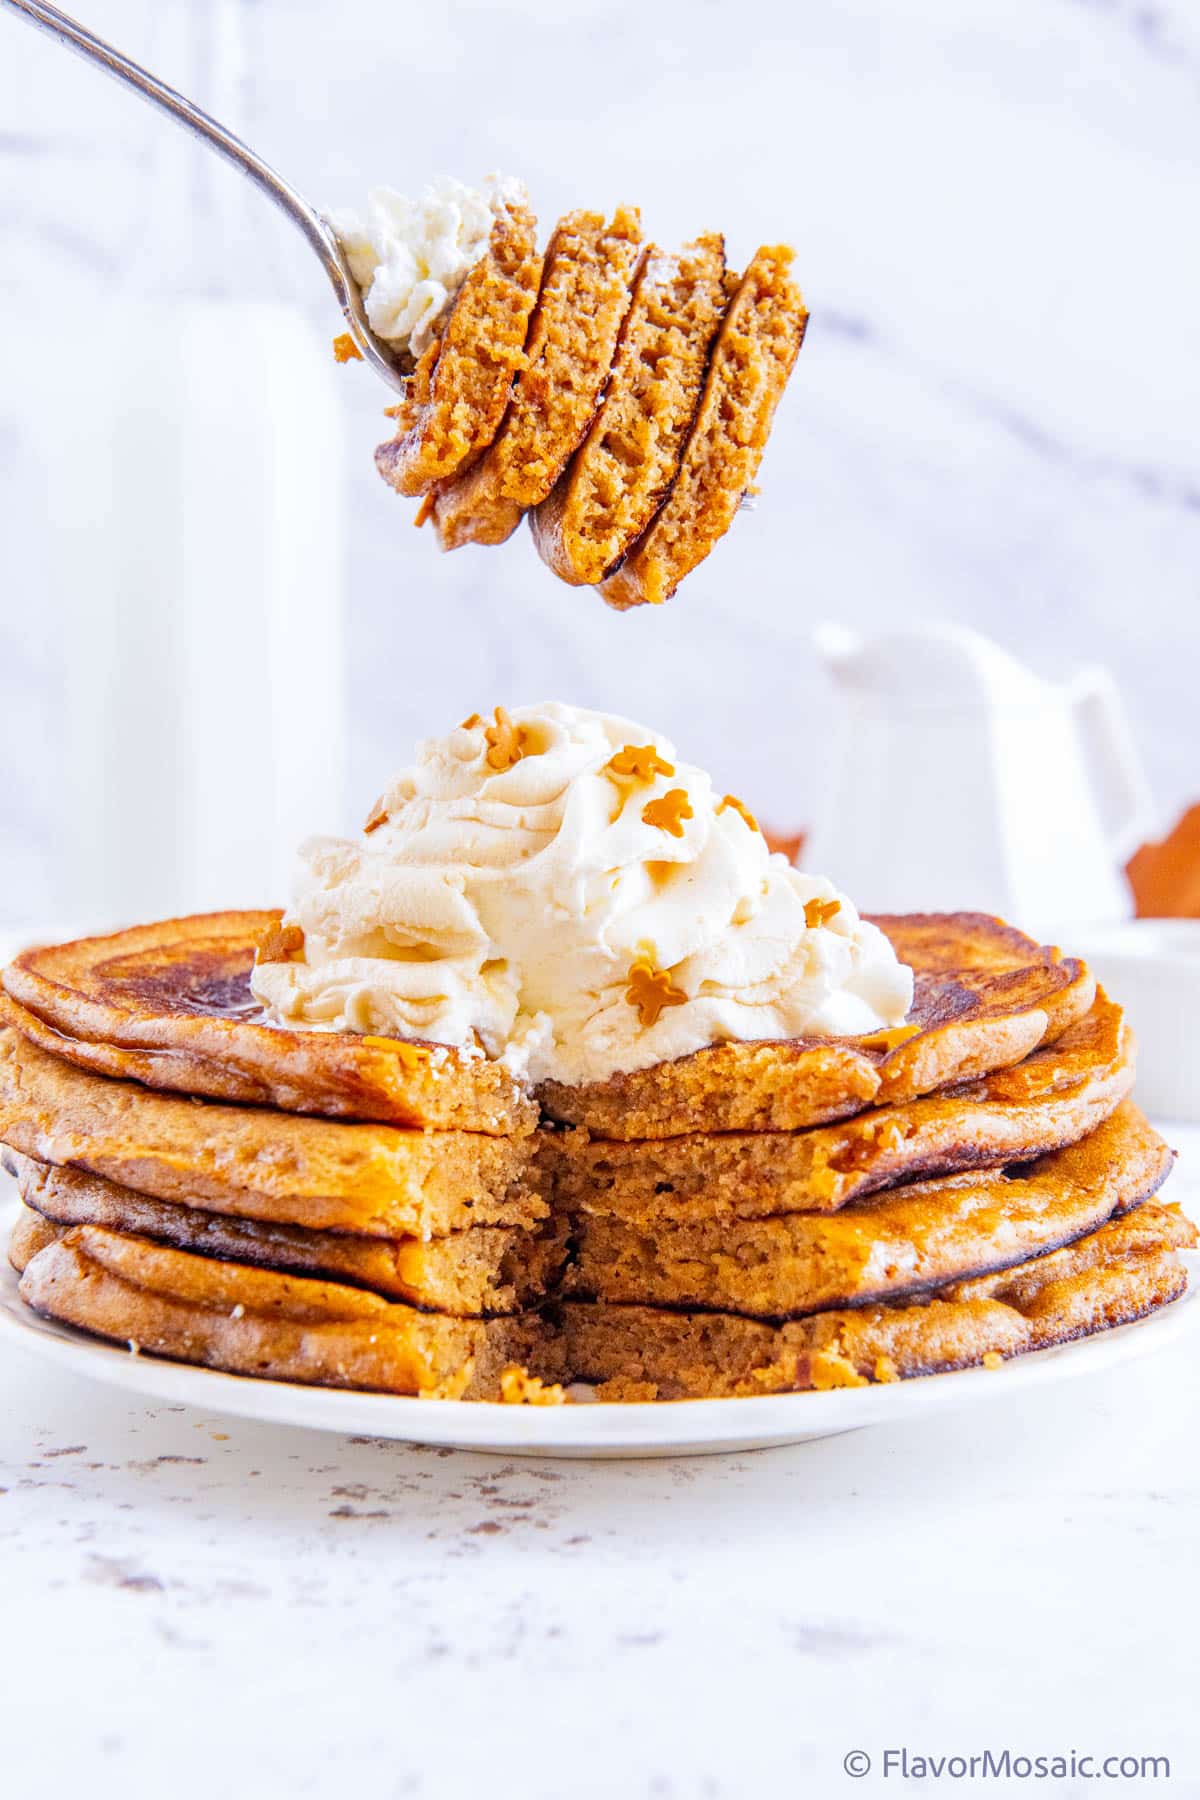 A fork with a bite of 4 gingerbread pancakes with whipped cream being held in the air, against white marble background, and above a stack of 4 gingerbread pancakes, topped with whipped cream, with a single bite cut from all 4 pancakes.